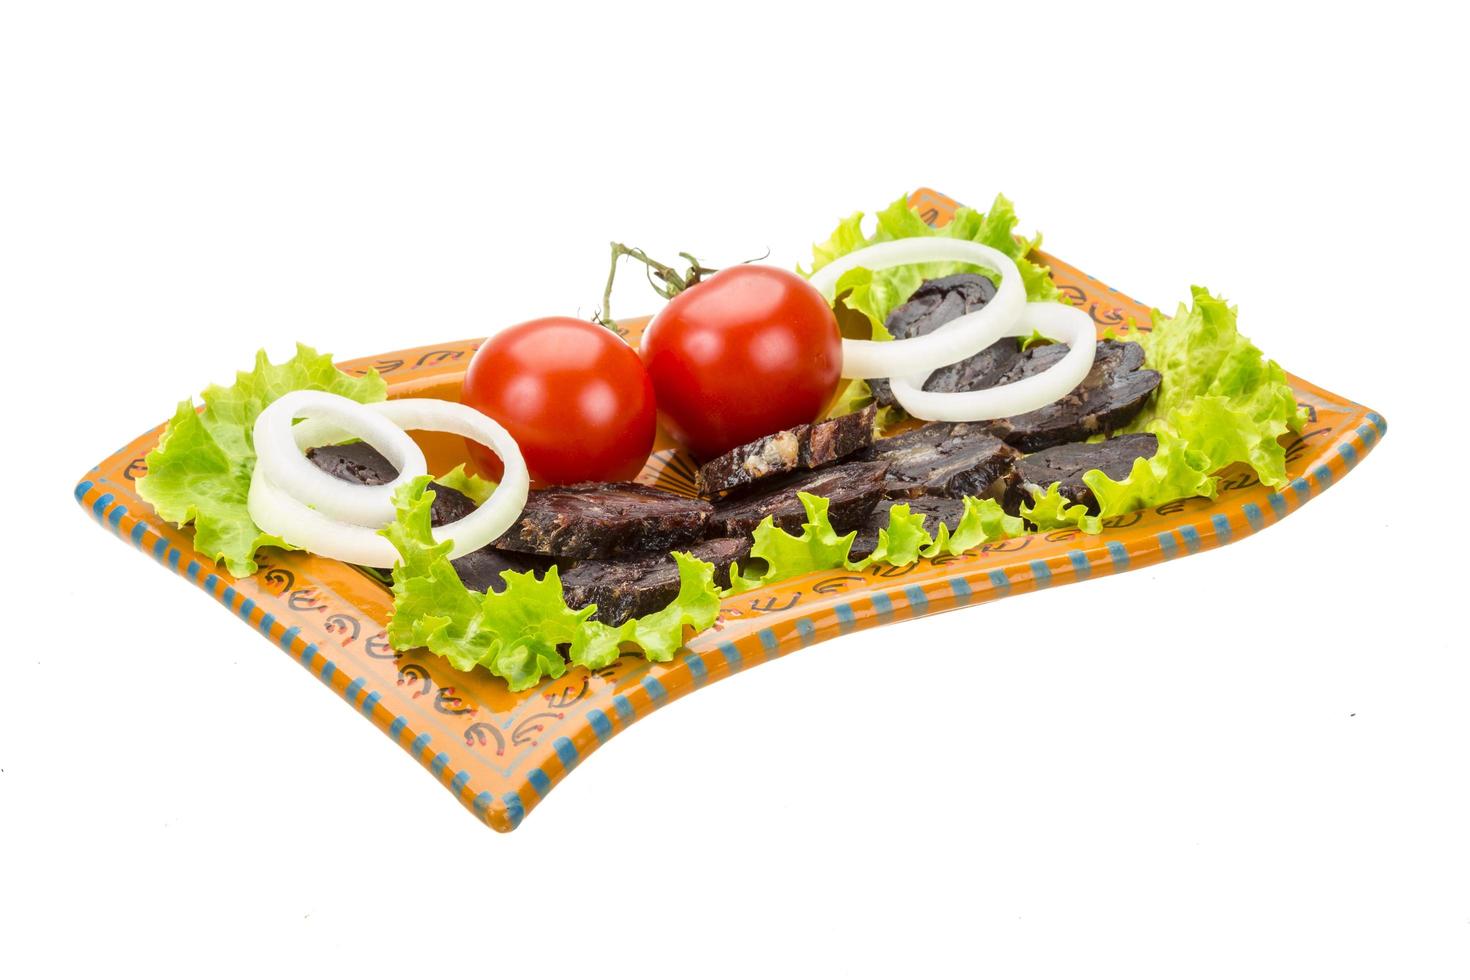 Horsemeat sausage on the plate and white background photo